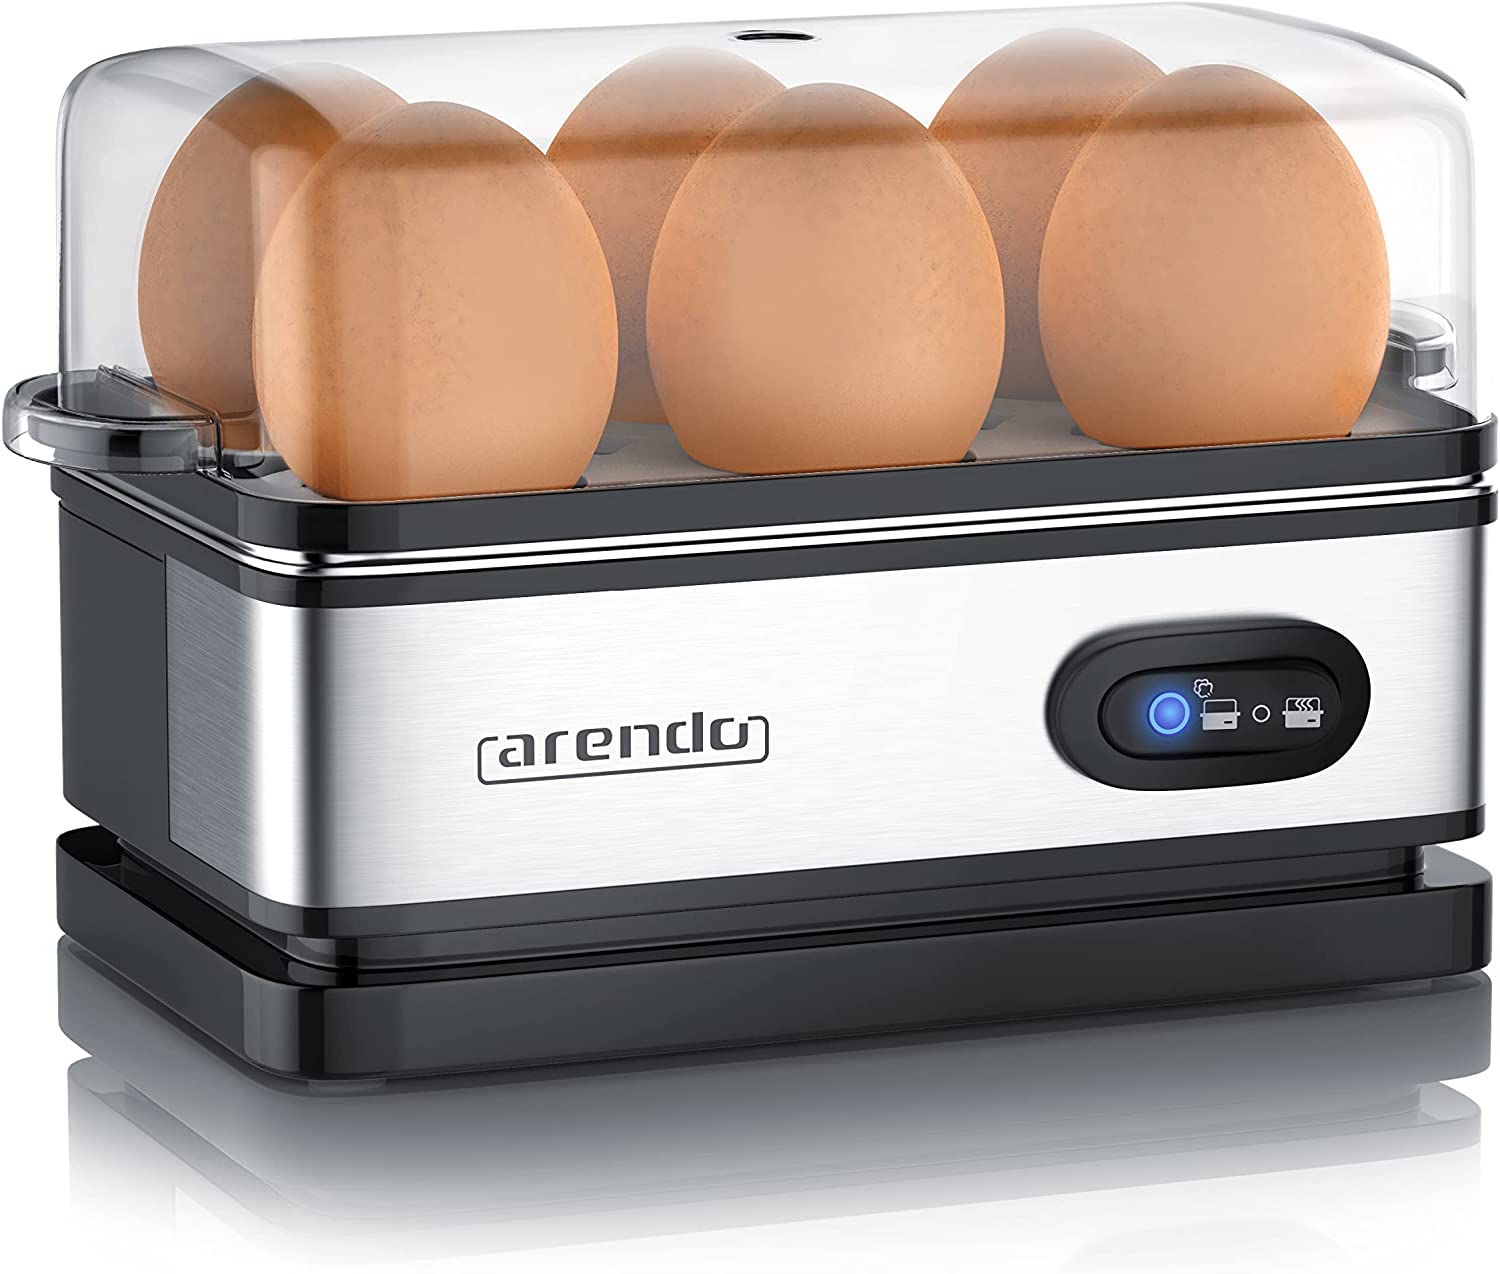 Arendo - Egg cooker stainless steel with warming function - tilt function switch with indicator light - freely selectable degree of hardness - rust-proof brushed stainless steel - copper